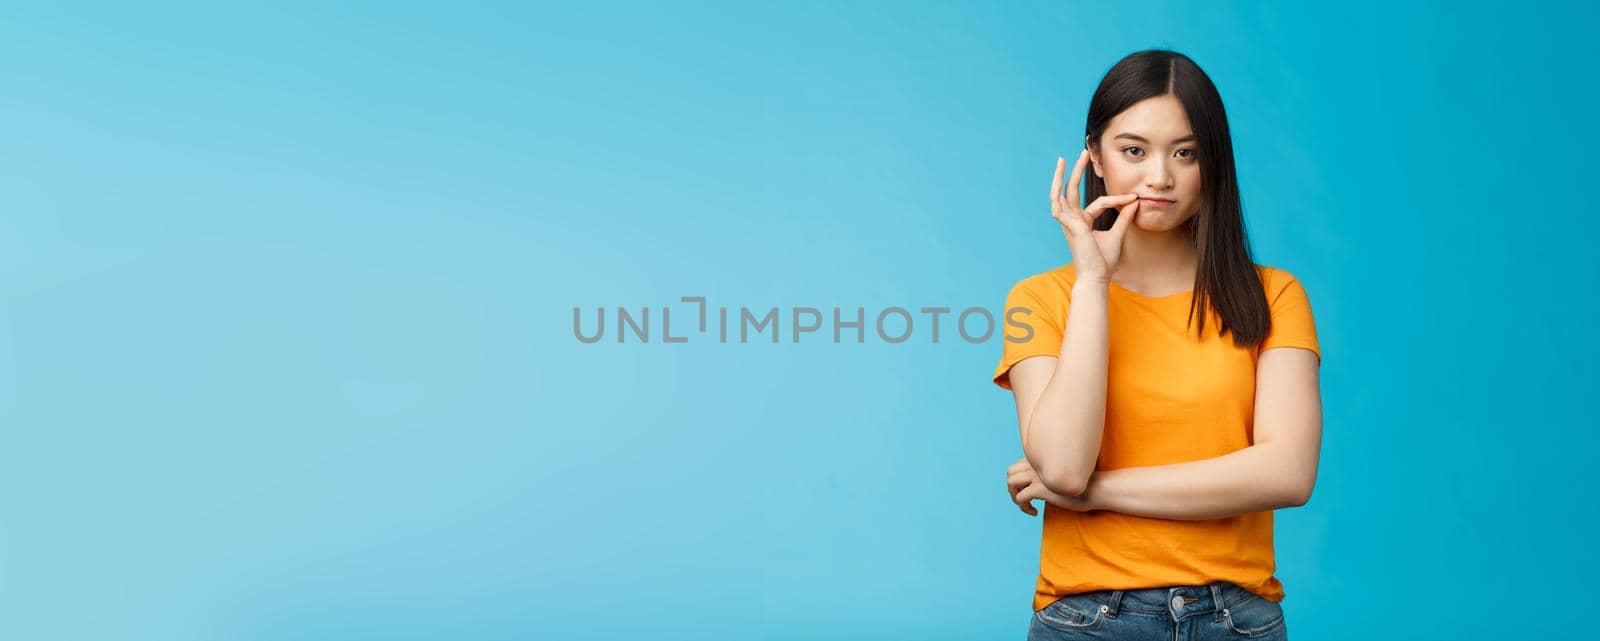 Serious-looking asian female friend promise keep secret, seal lips, hold zip near mouth look focused determined, stay silent and speechless, stand wearing yellow t-shirt blue background.